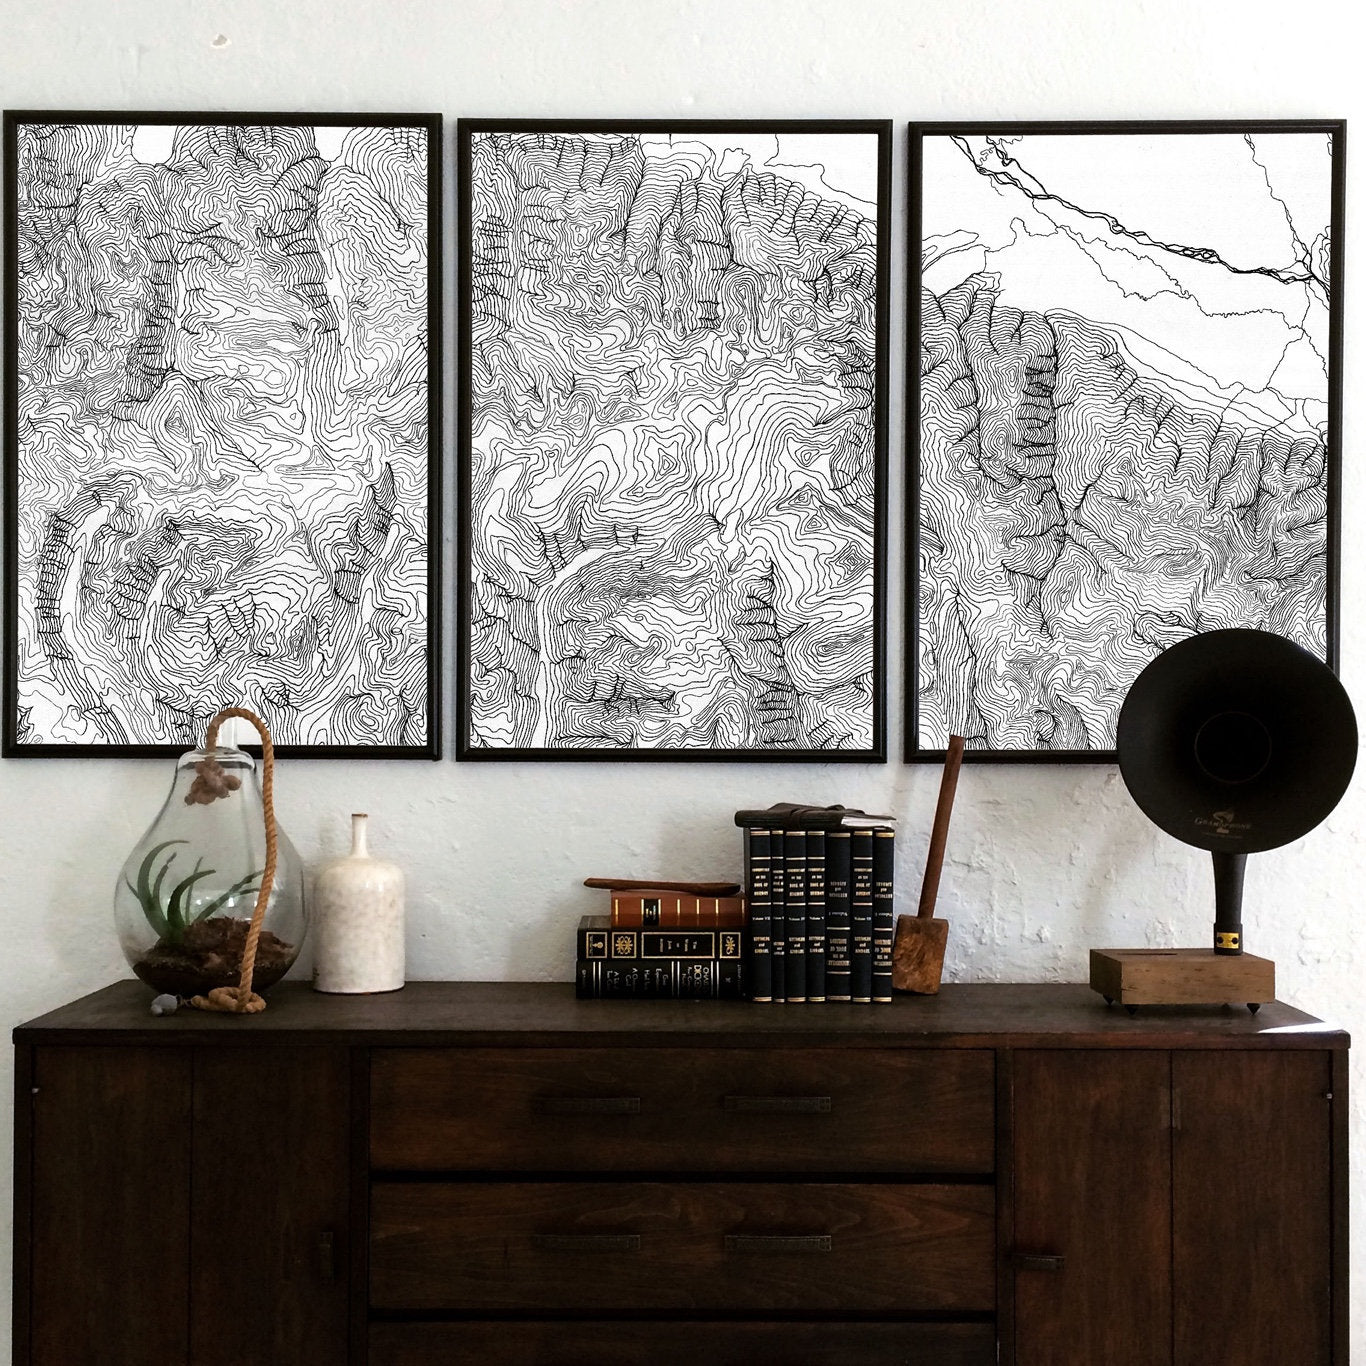 Grand Teton Topographical Map Set of 3 - 24x36 inch giclee prints